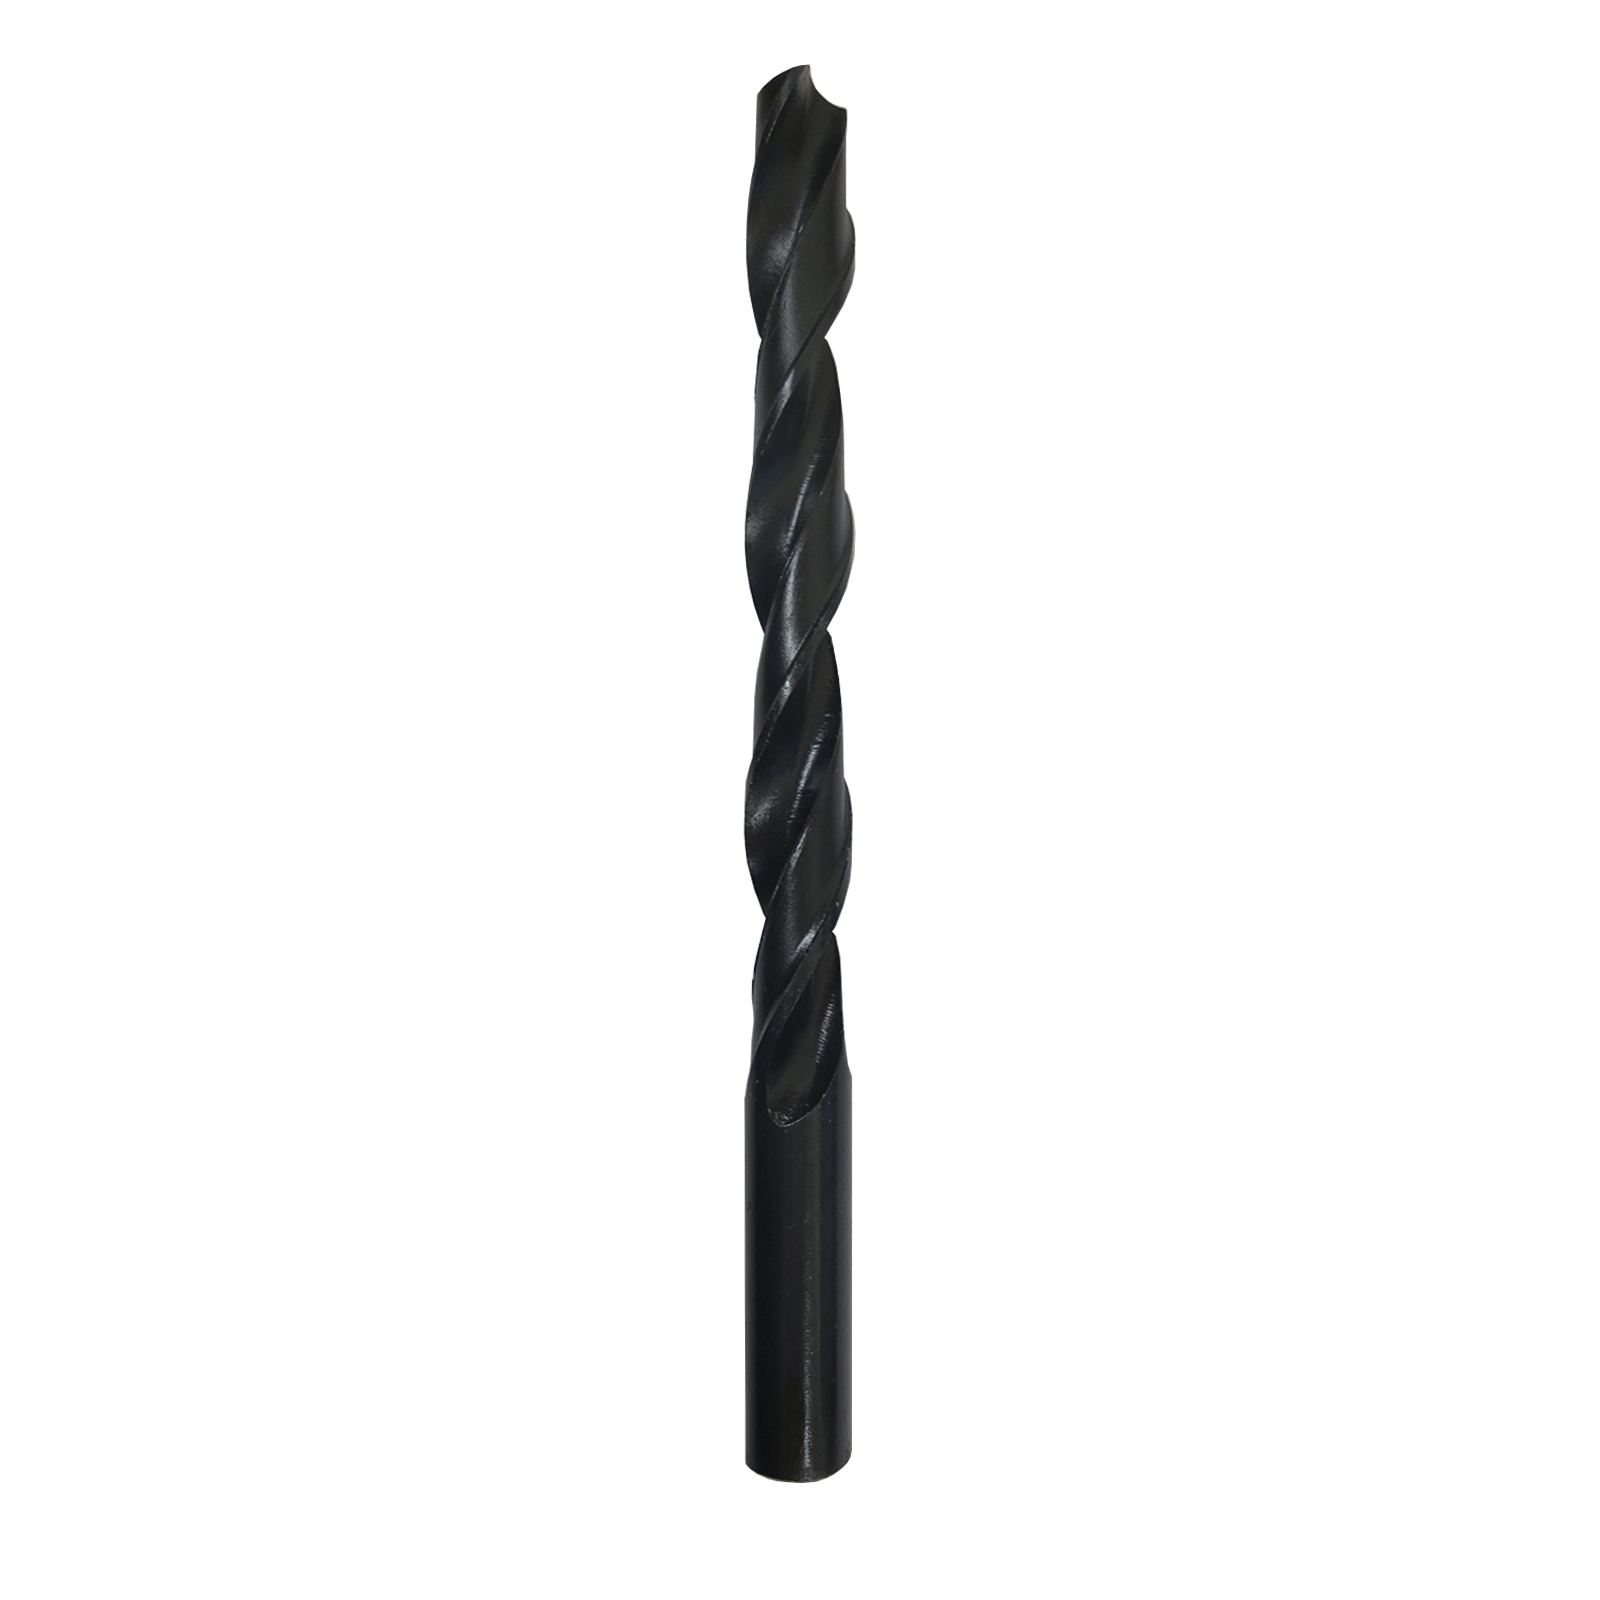 Gyros 45-42080 Premium (Made in US) Industrial Grade HSS Black Oxide Metric Drill Bit, 6.2 mm, Pack of 12